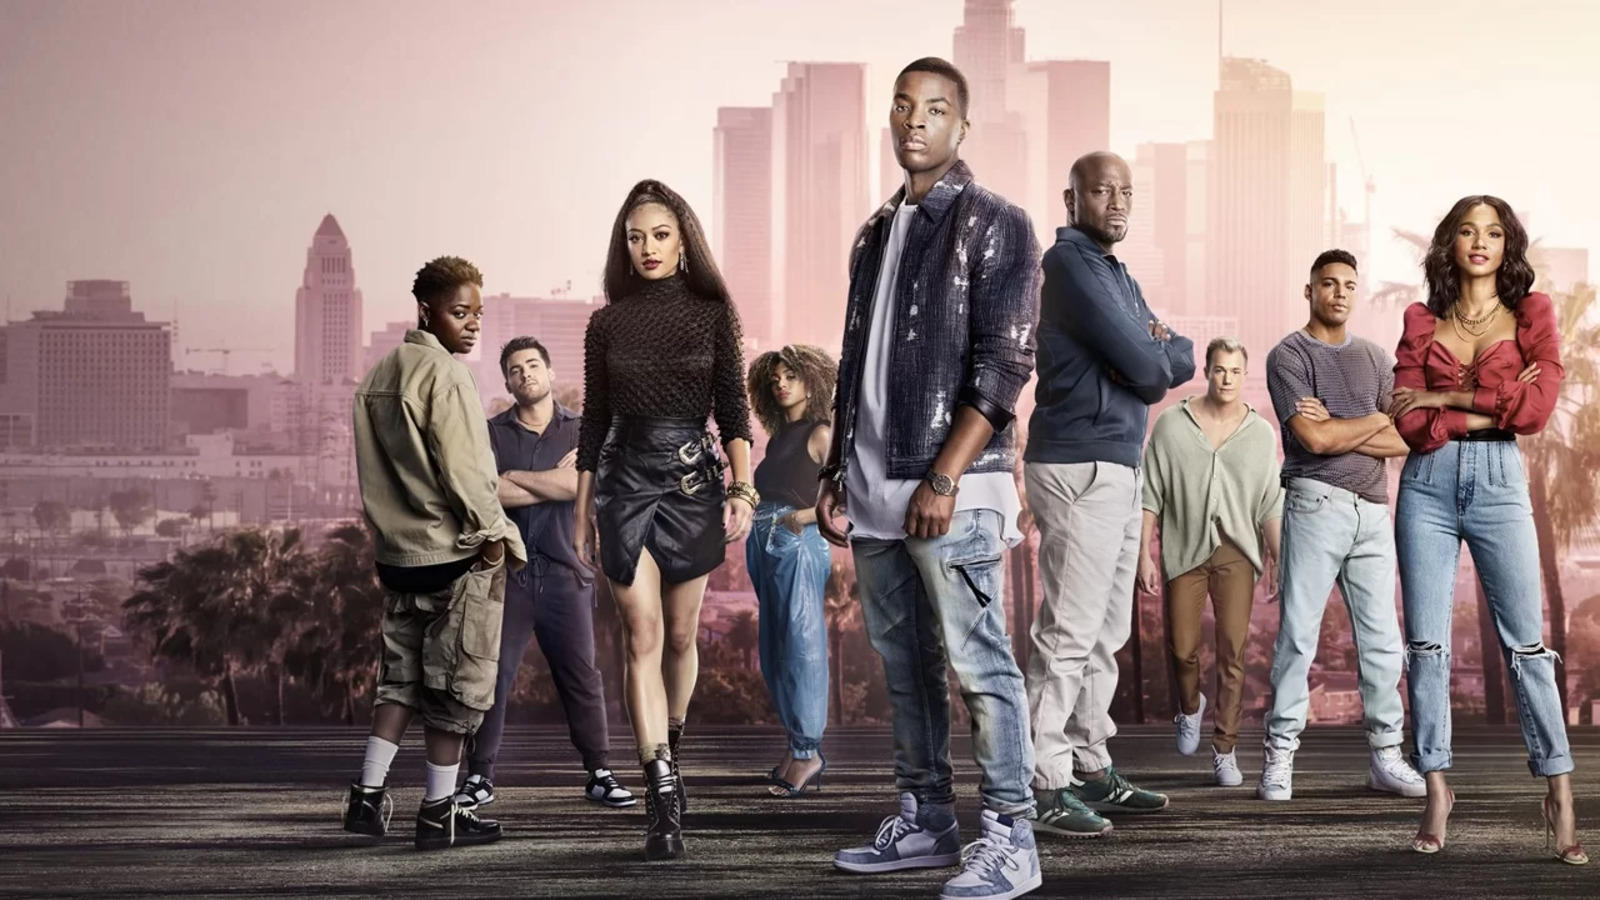 Exciting Update All American Season 6 Premiere Date, Cast Reveals, and What Fans Can Expect-